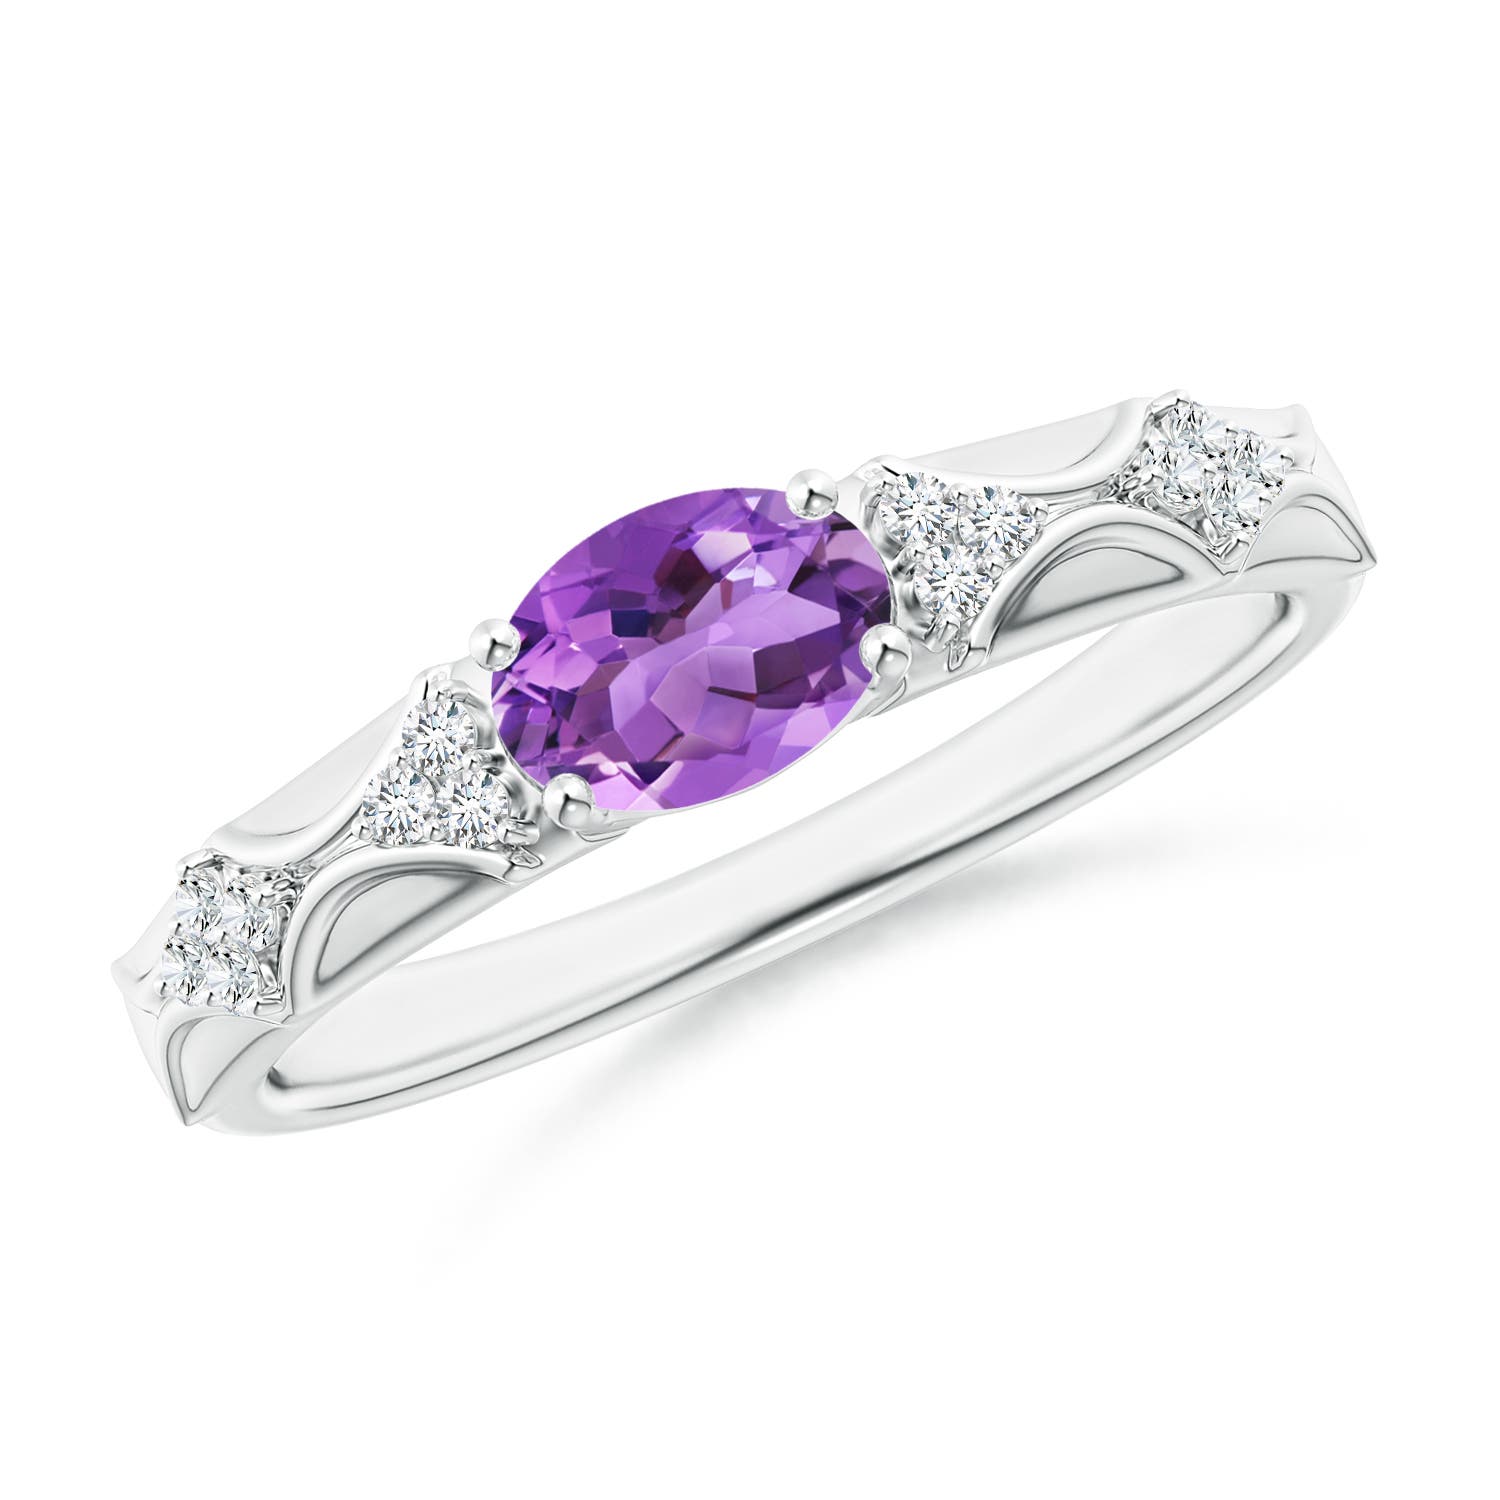 AA - Amethyst / 0.75 CT / 14 KT White Gold